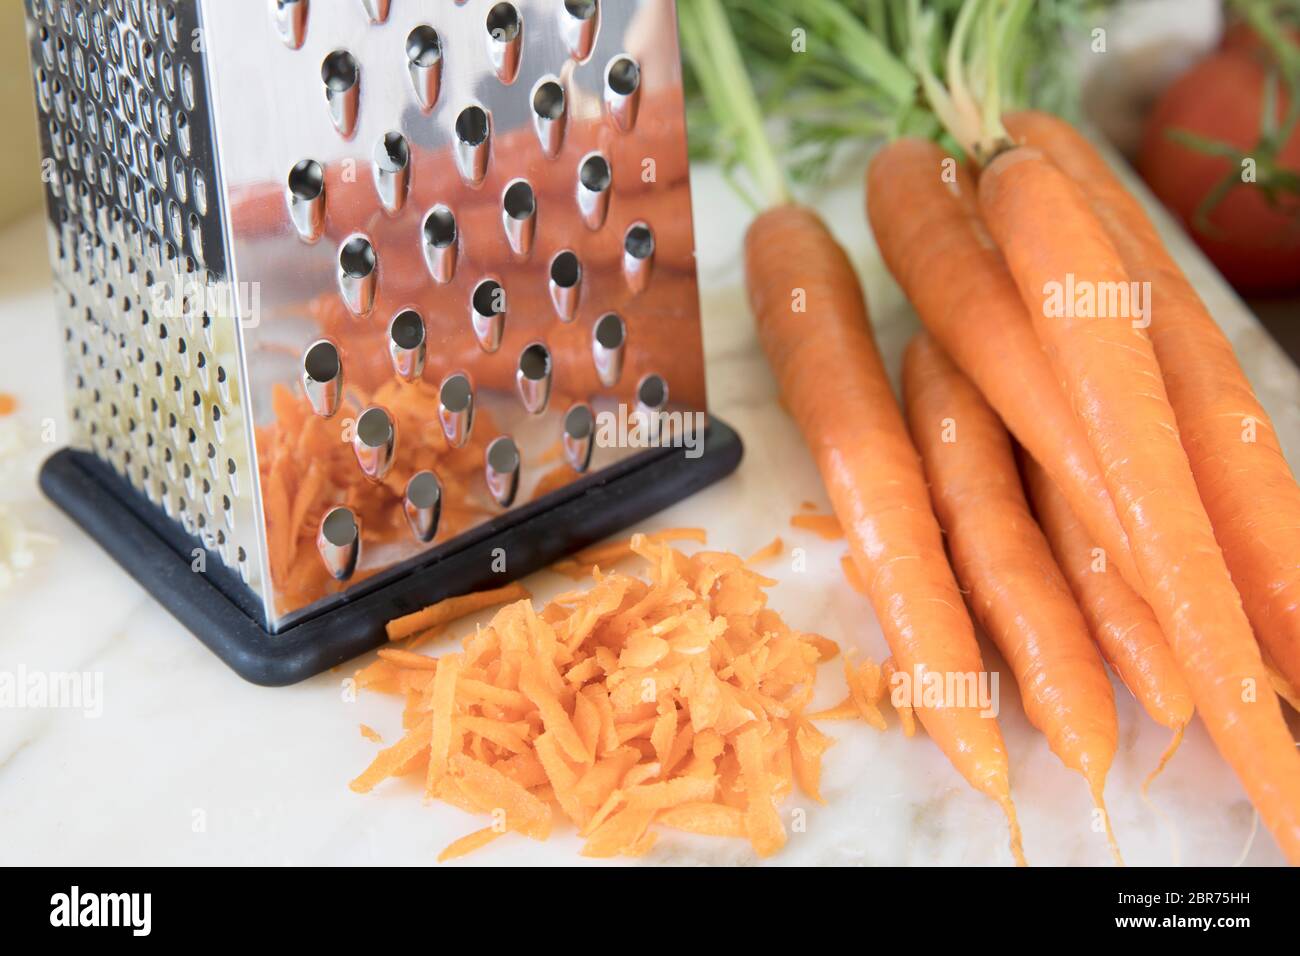 A large piece of carrots lies on a grater. Interrupted shredding